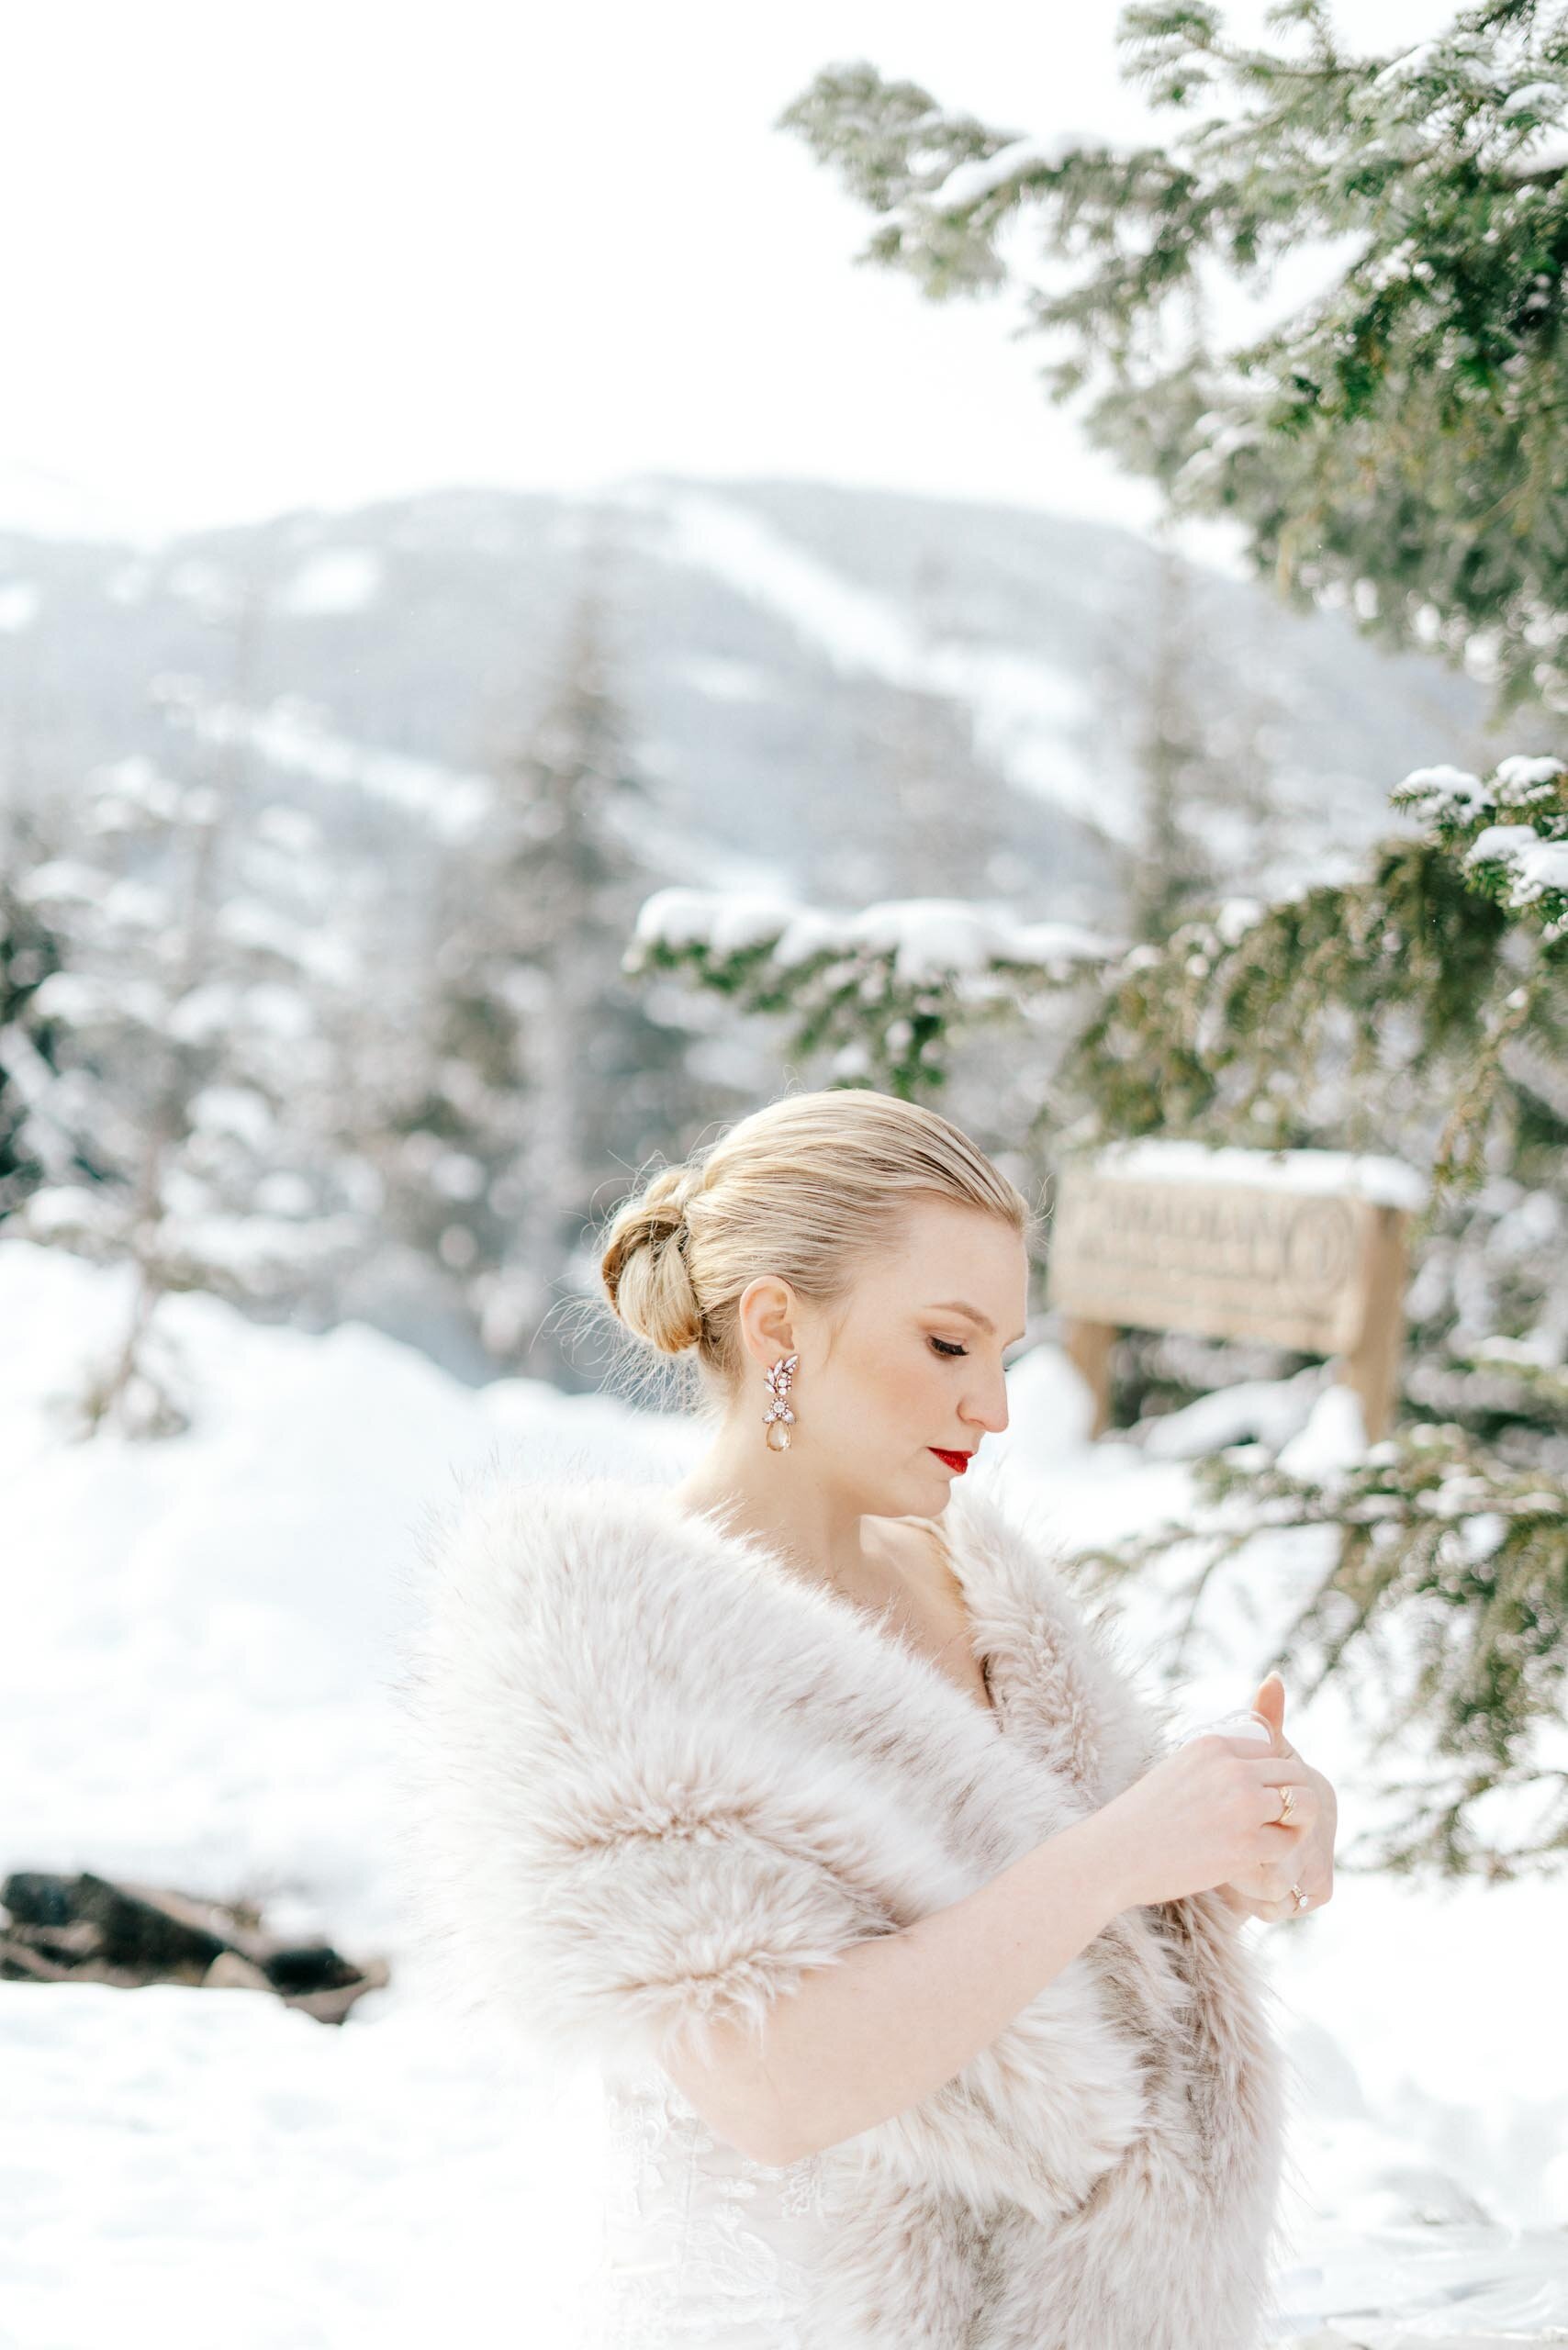 A pale blonde in a fur stole considers her wedding ring as she stands in the snow.